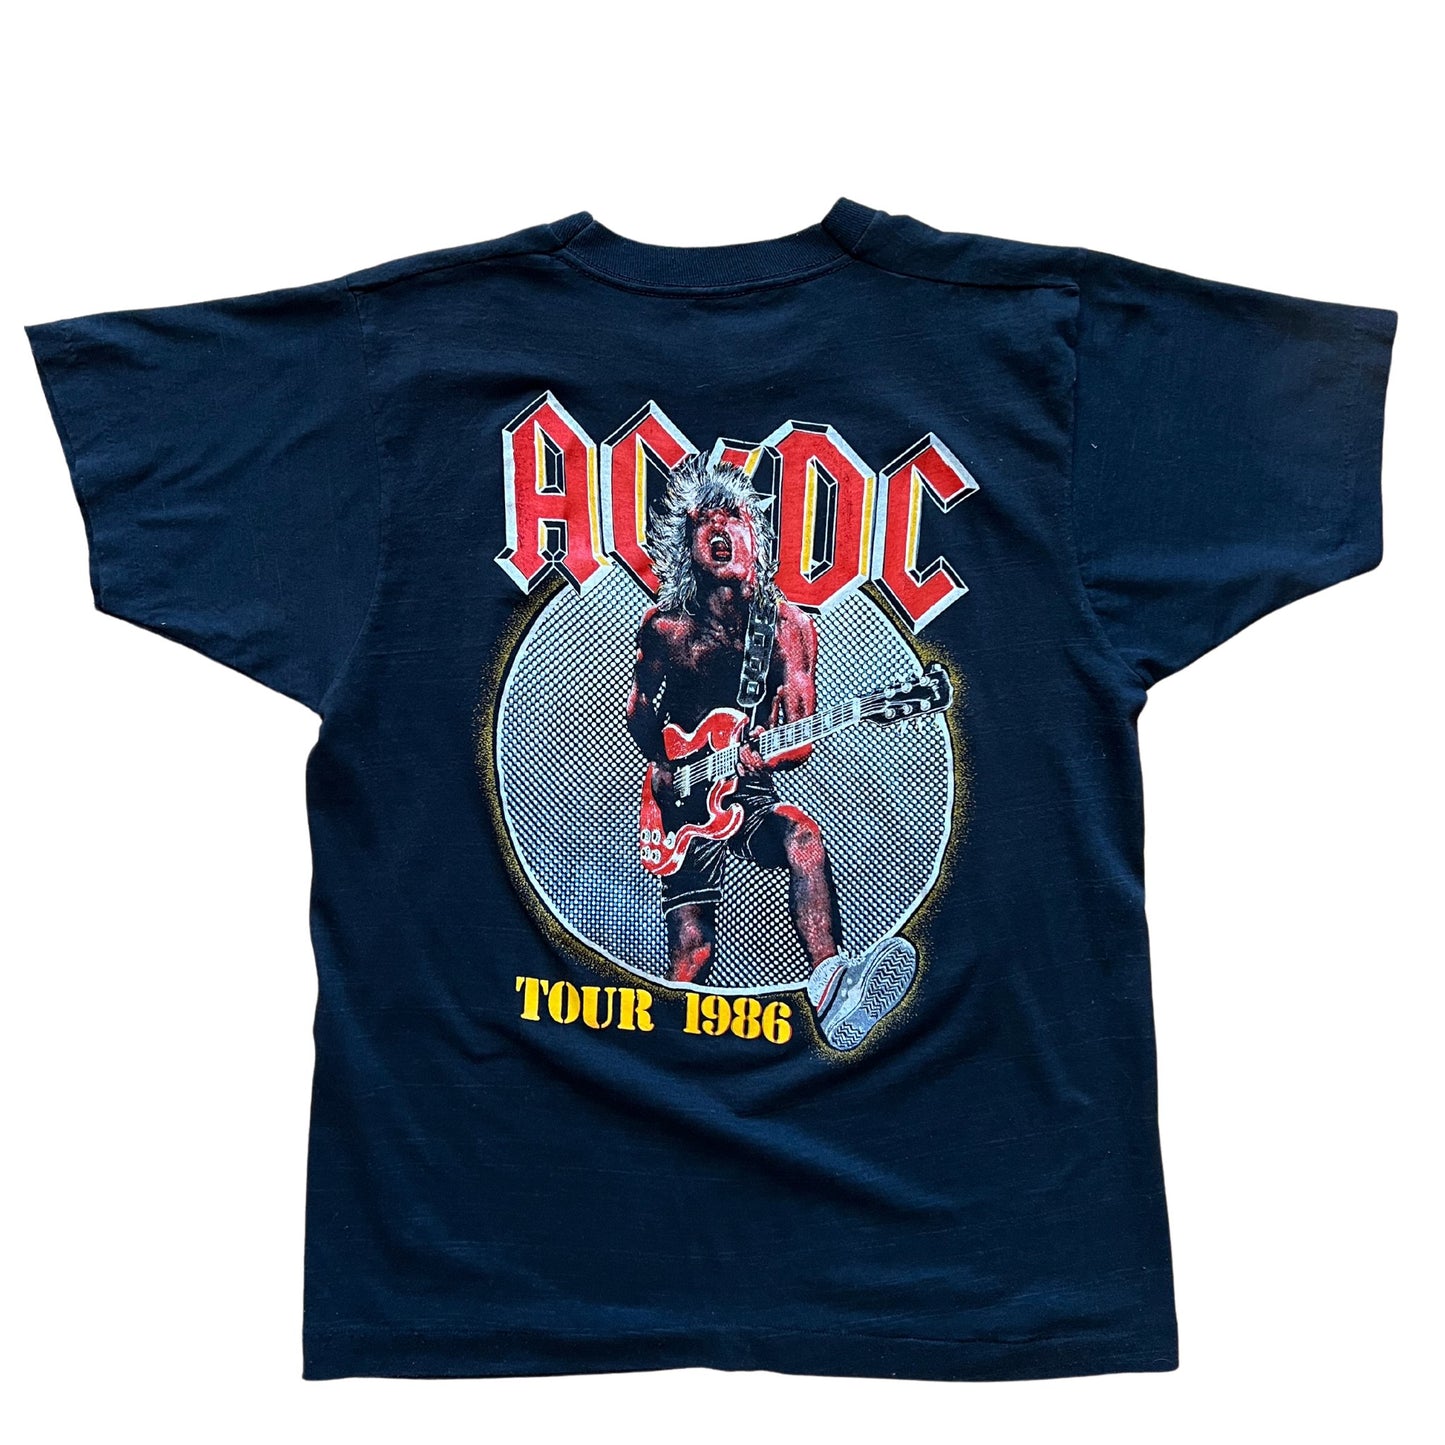 Vintage 1986 ACDC Tee Shirt - Something about Sofia